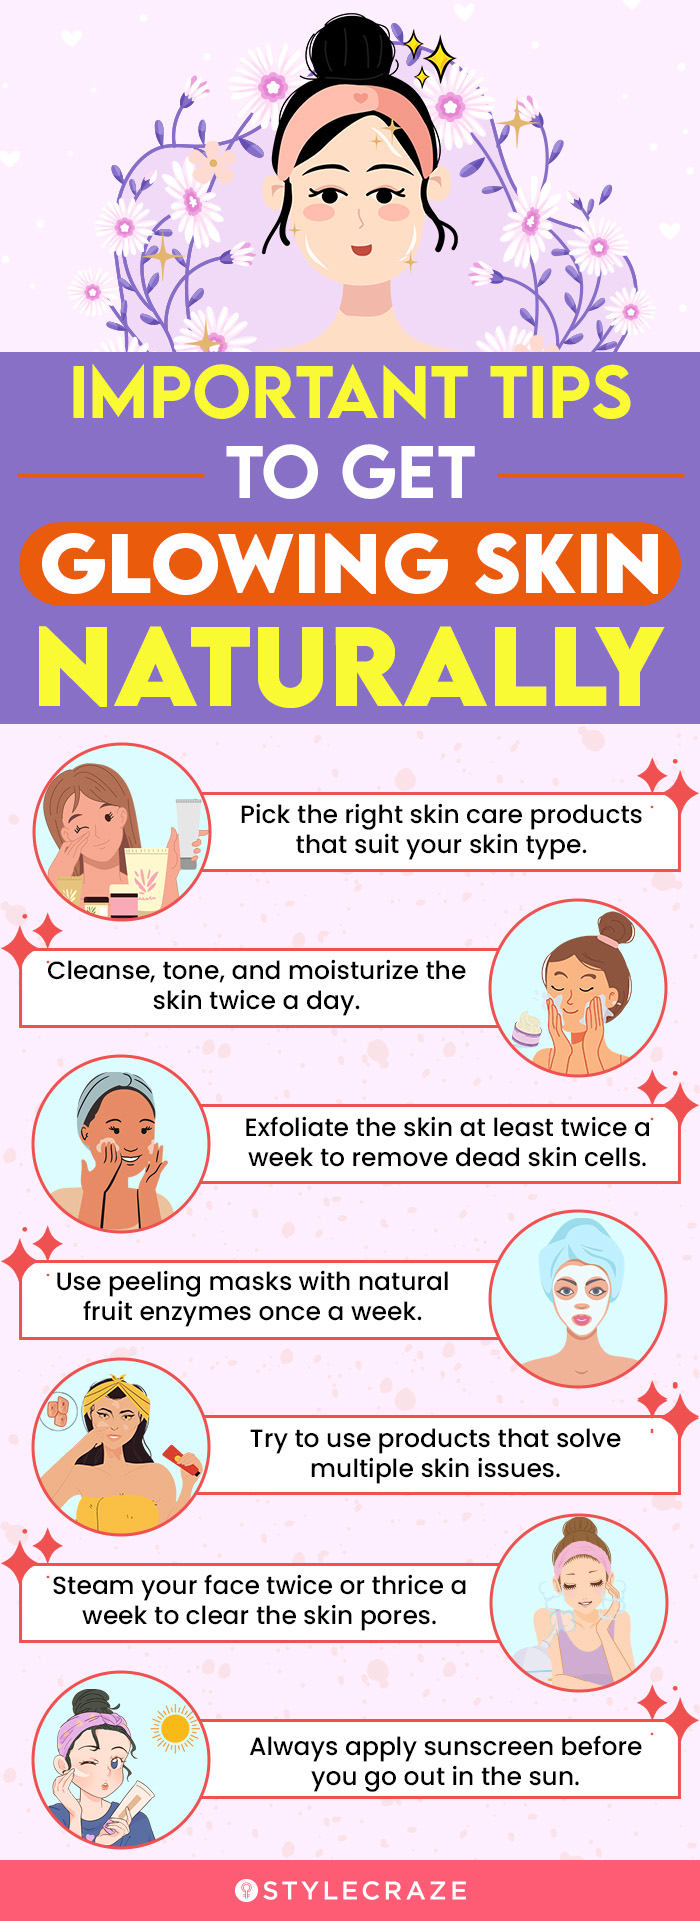 important tips to get glowing skin naturally (infographic)